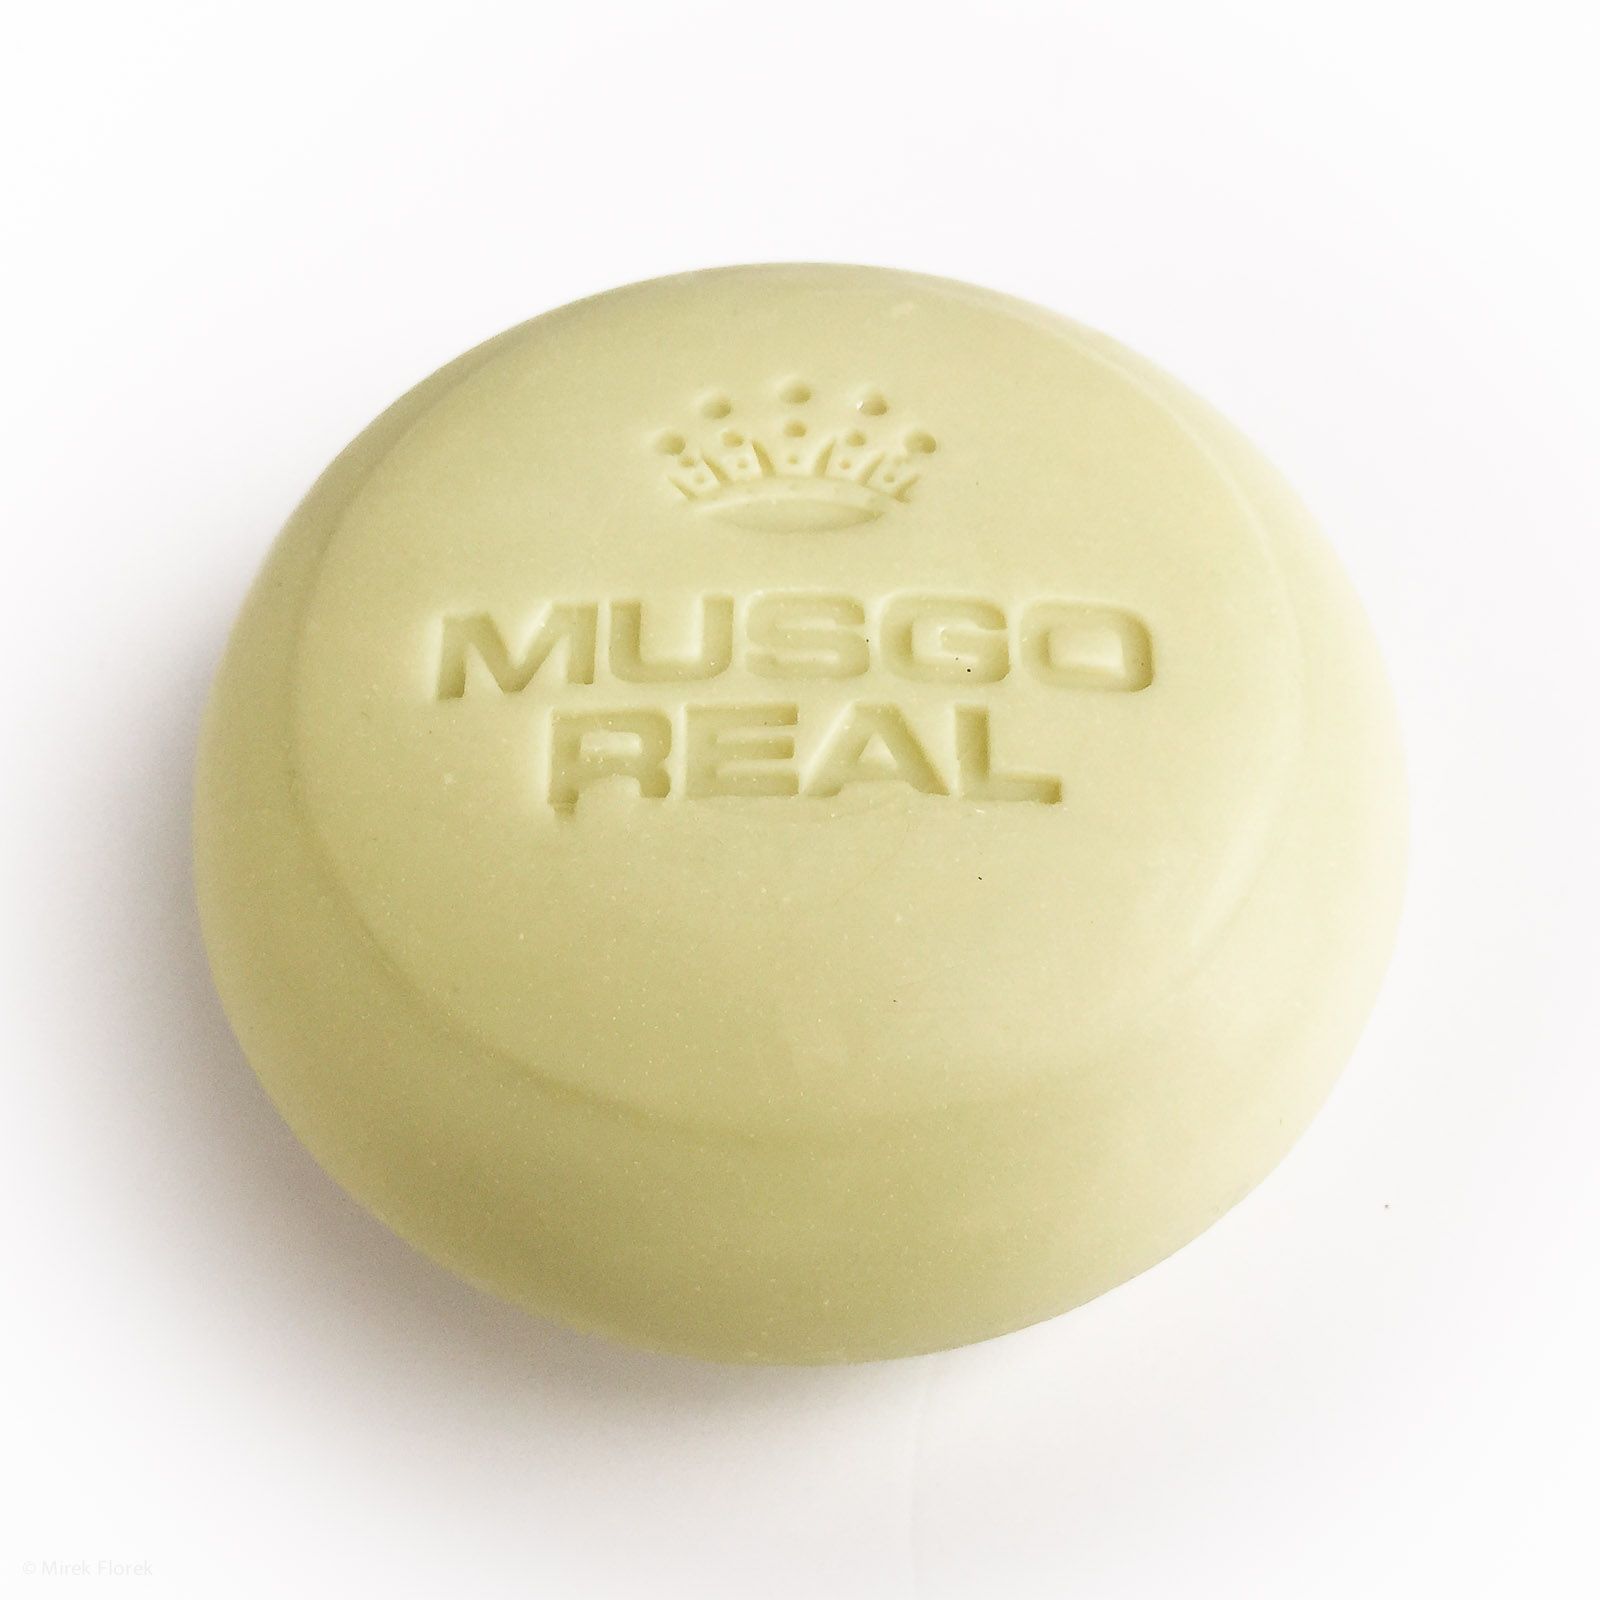 Musgo Real Men's Shave Soap Classic Scent